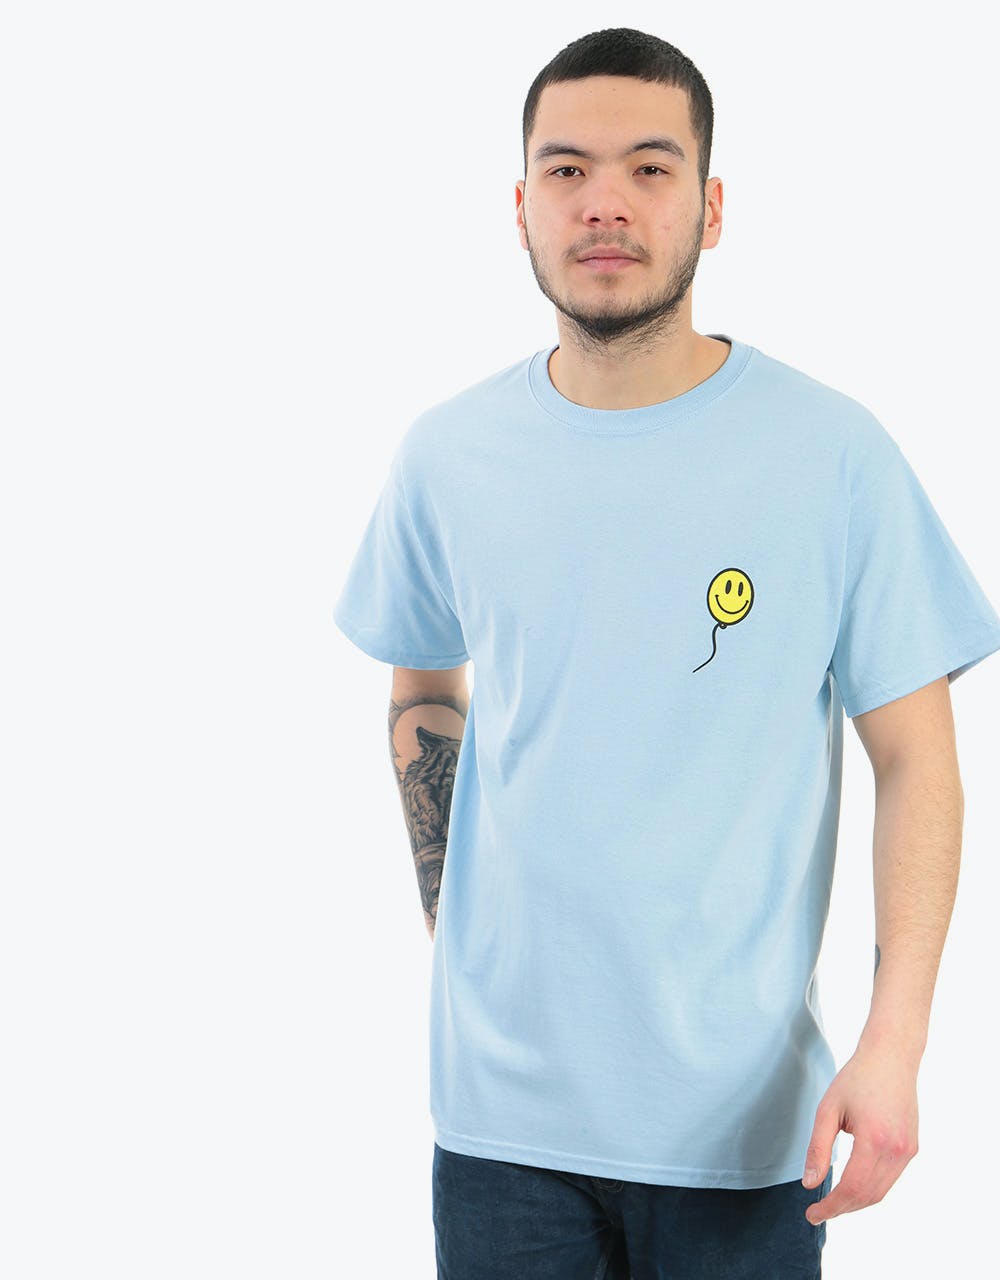 Route One Happy T-Shirt - Light Blue